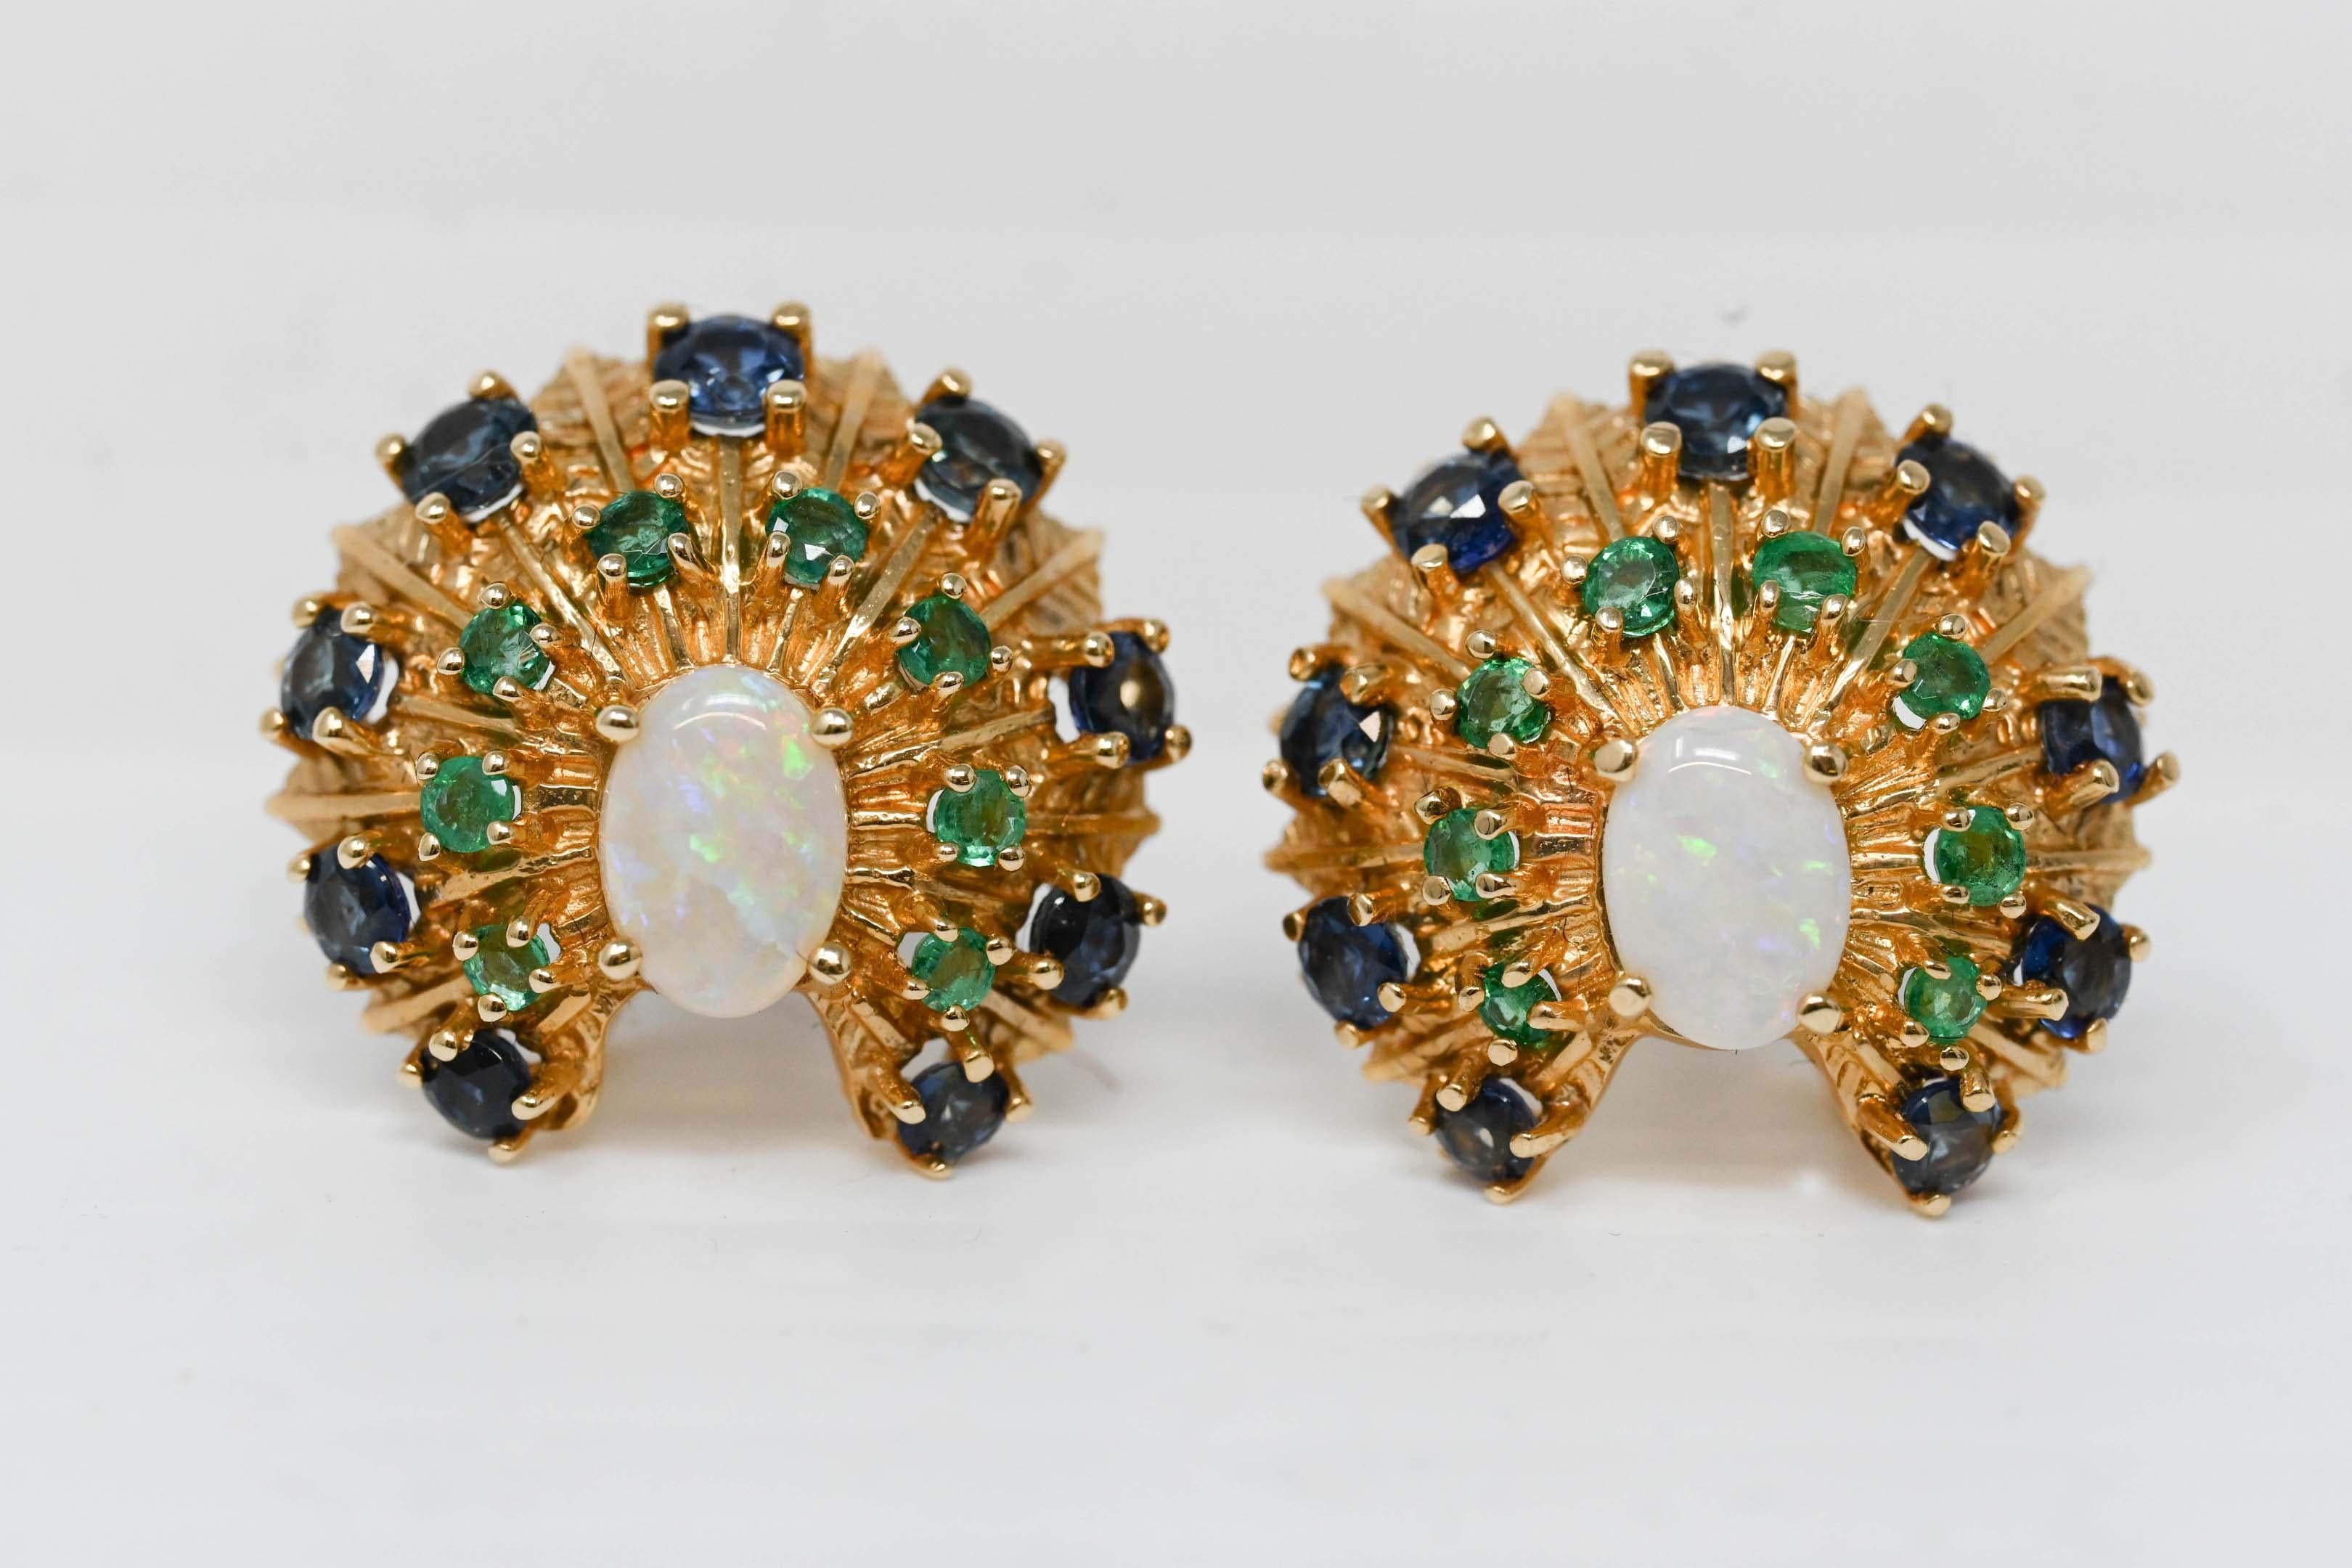 Franklin Mint 1989 14k gold 5 x 7 mm opal, emeralds and sapphires gemstone. Peacock design earrings with screwed post. Stamped on the back, F.M. 89. 14k weighs 9.6 grams. Maker mark is Franklin Mint.
